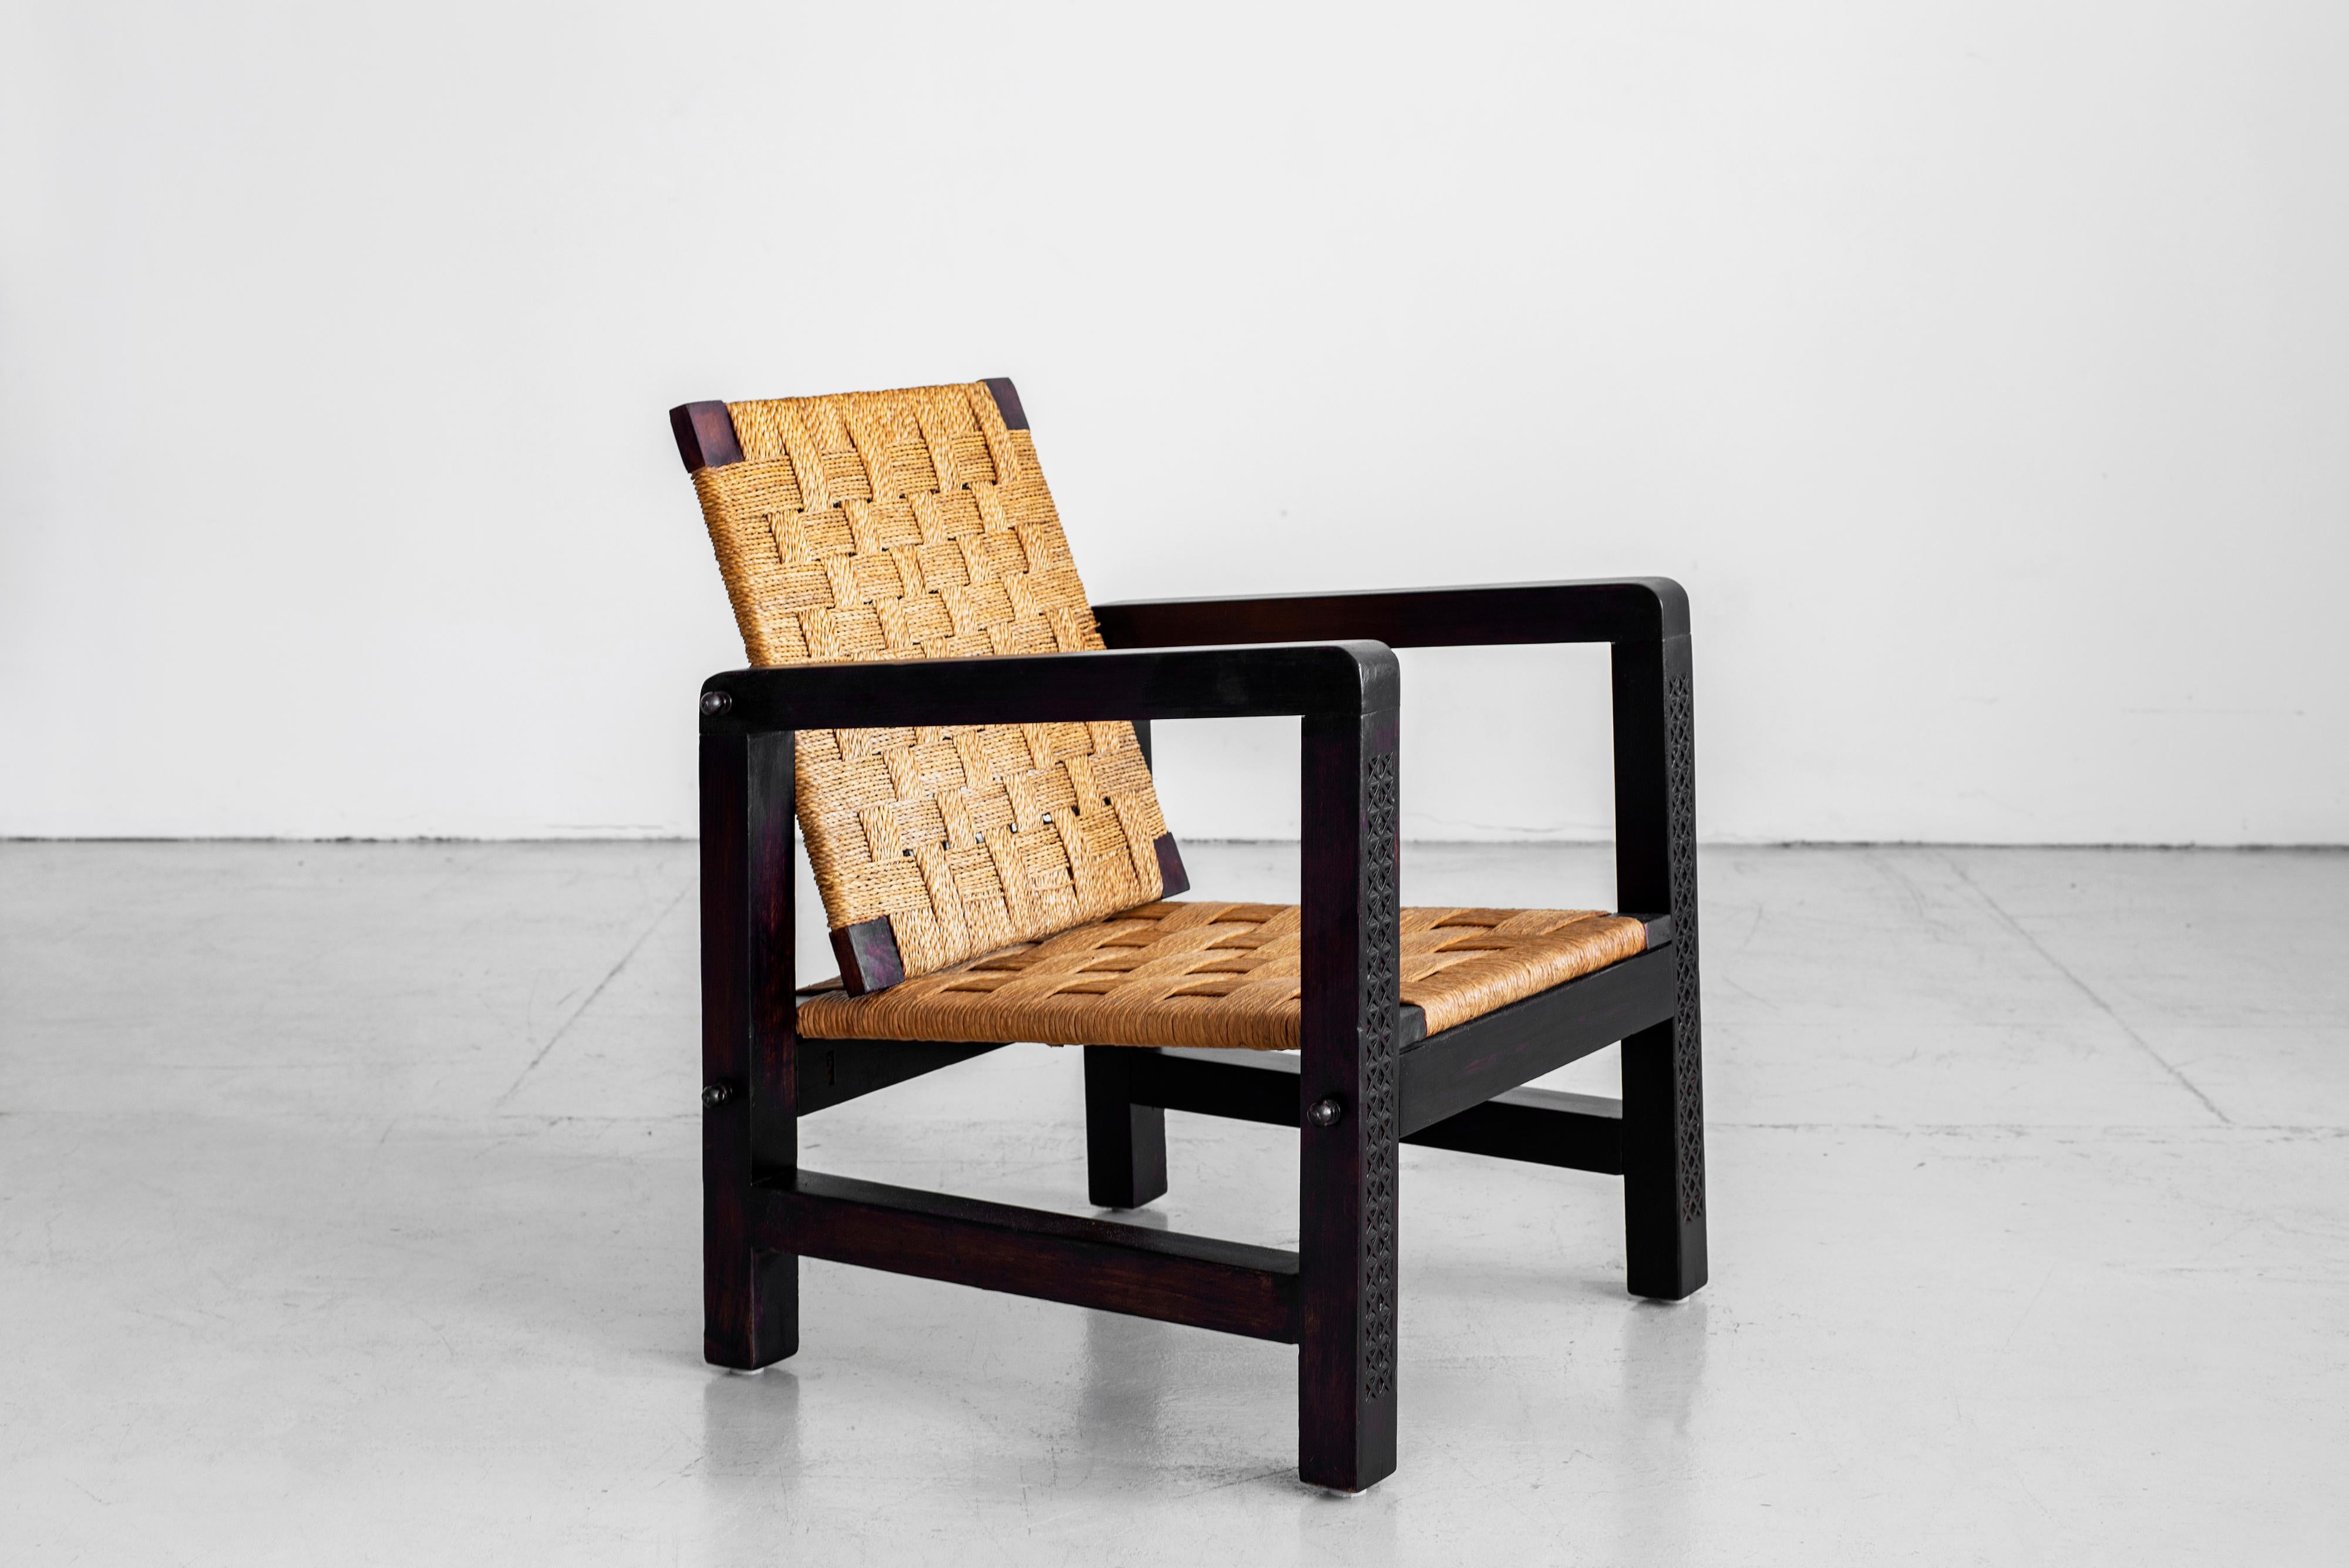 Pair of Francis Jourdain chairs with beautiful hand carved detailing on wood frame and woven straw seats. Solid frames with adjustable tilt woven rope backs make these incredible and unique. Great from every angle with wonderful patina.
 